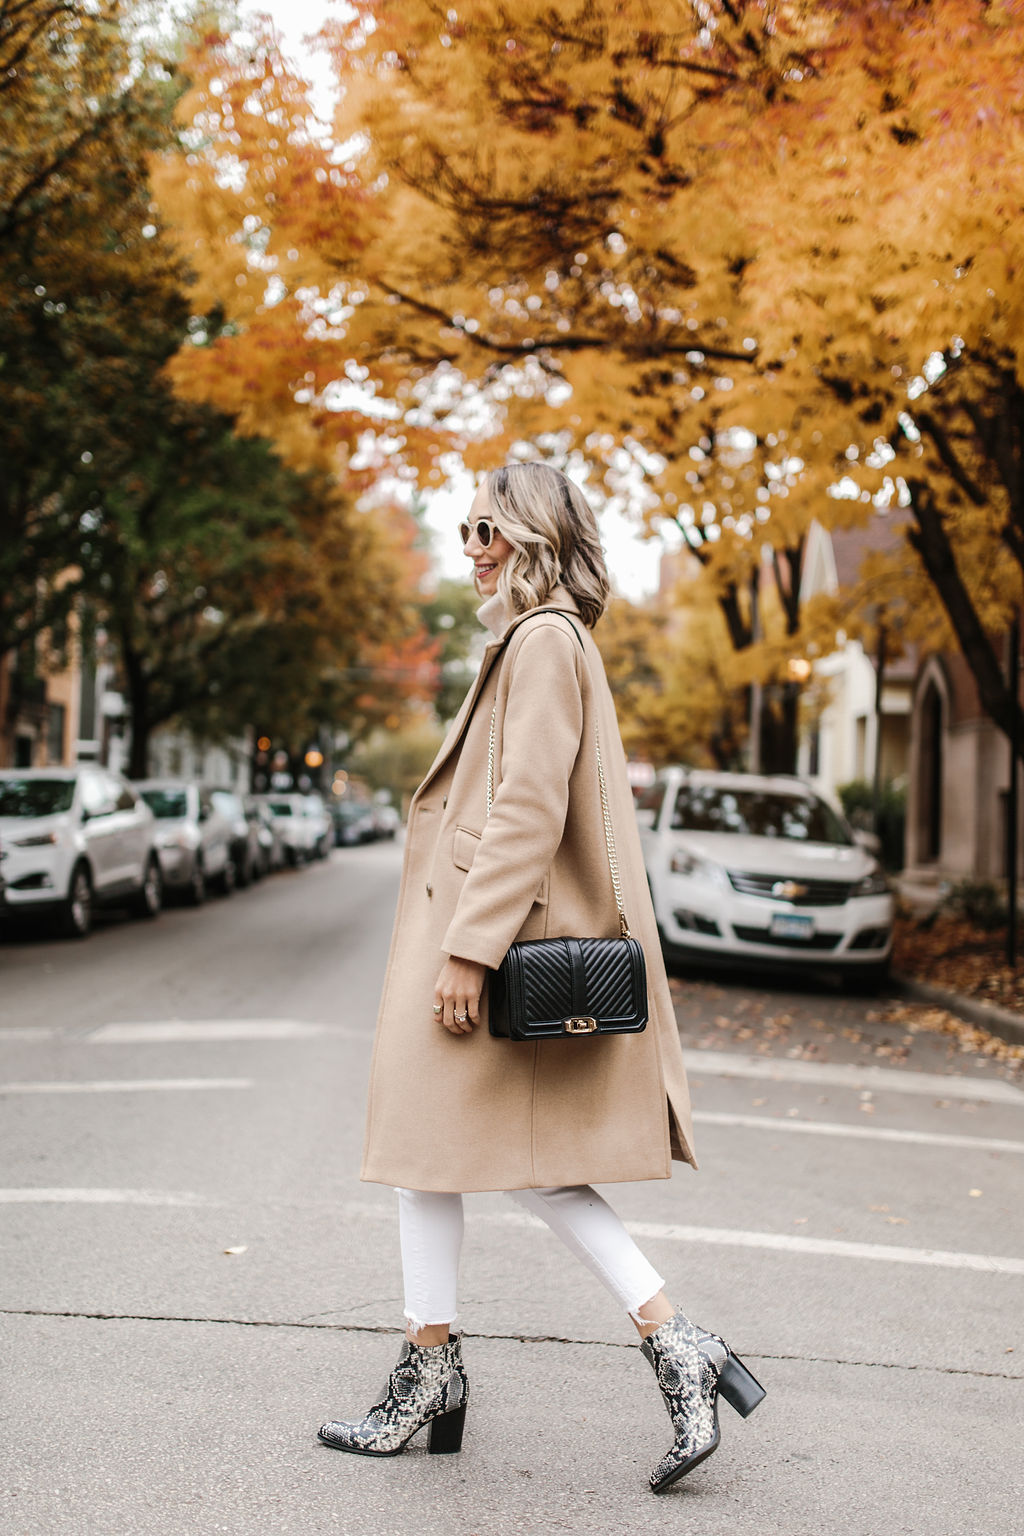 camel coat outfit casual